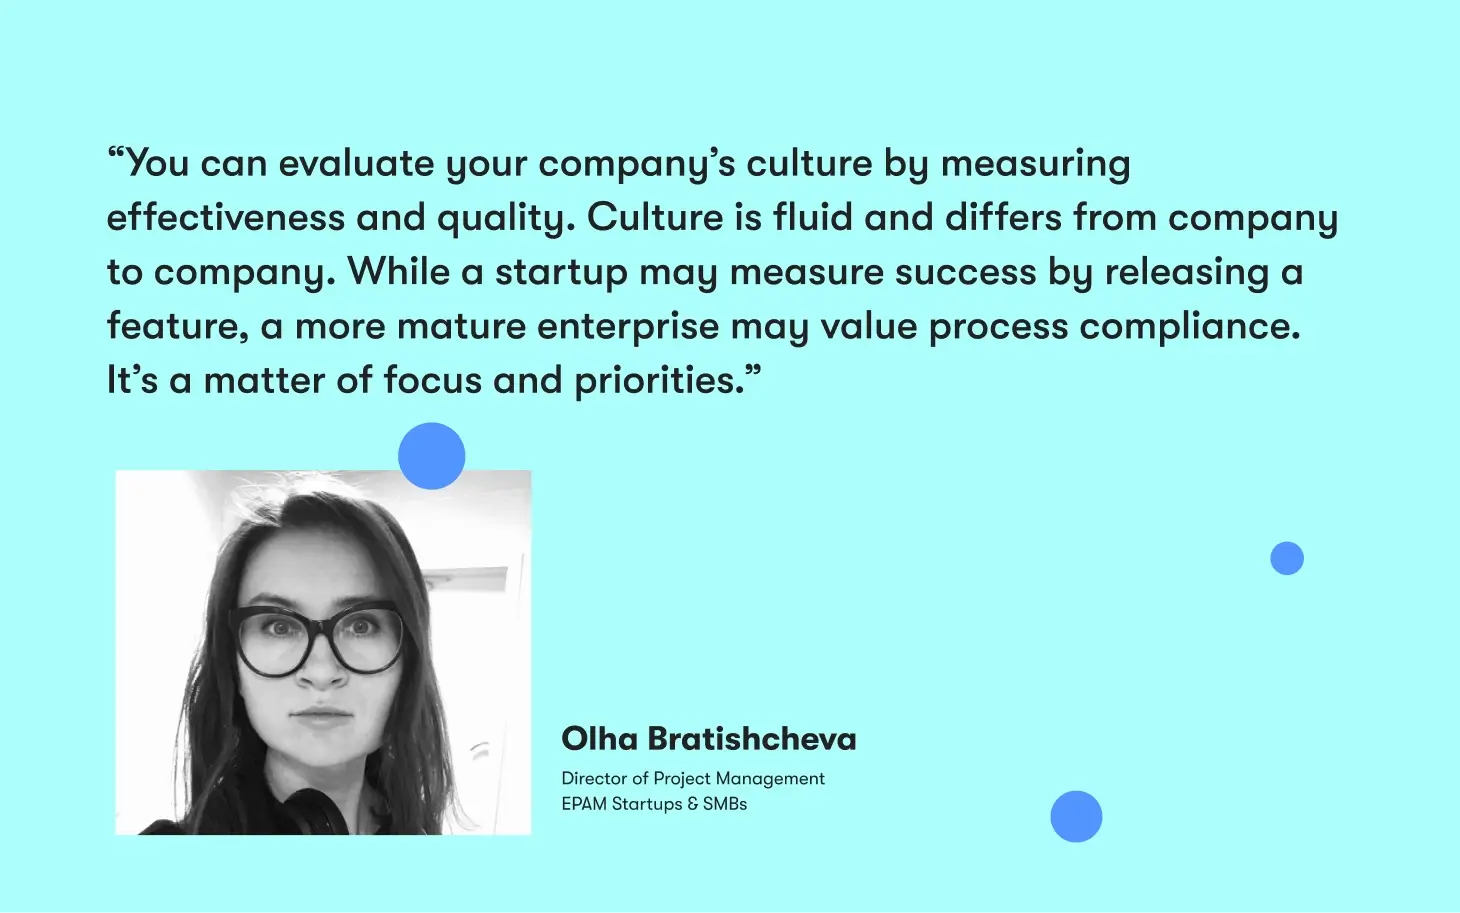 Olha Bratishcheva, Director of Project Management, EPAM Startups & SMBs on workplace culture and interviewing for cultural fit